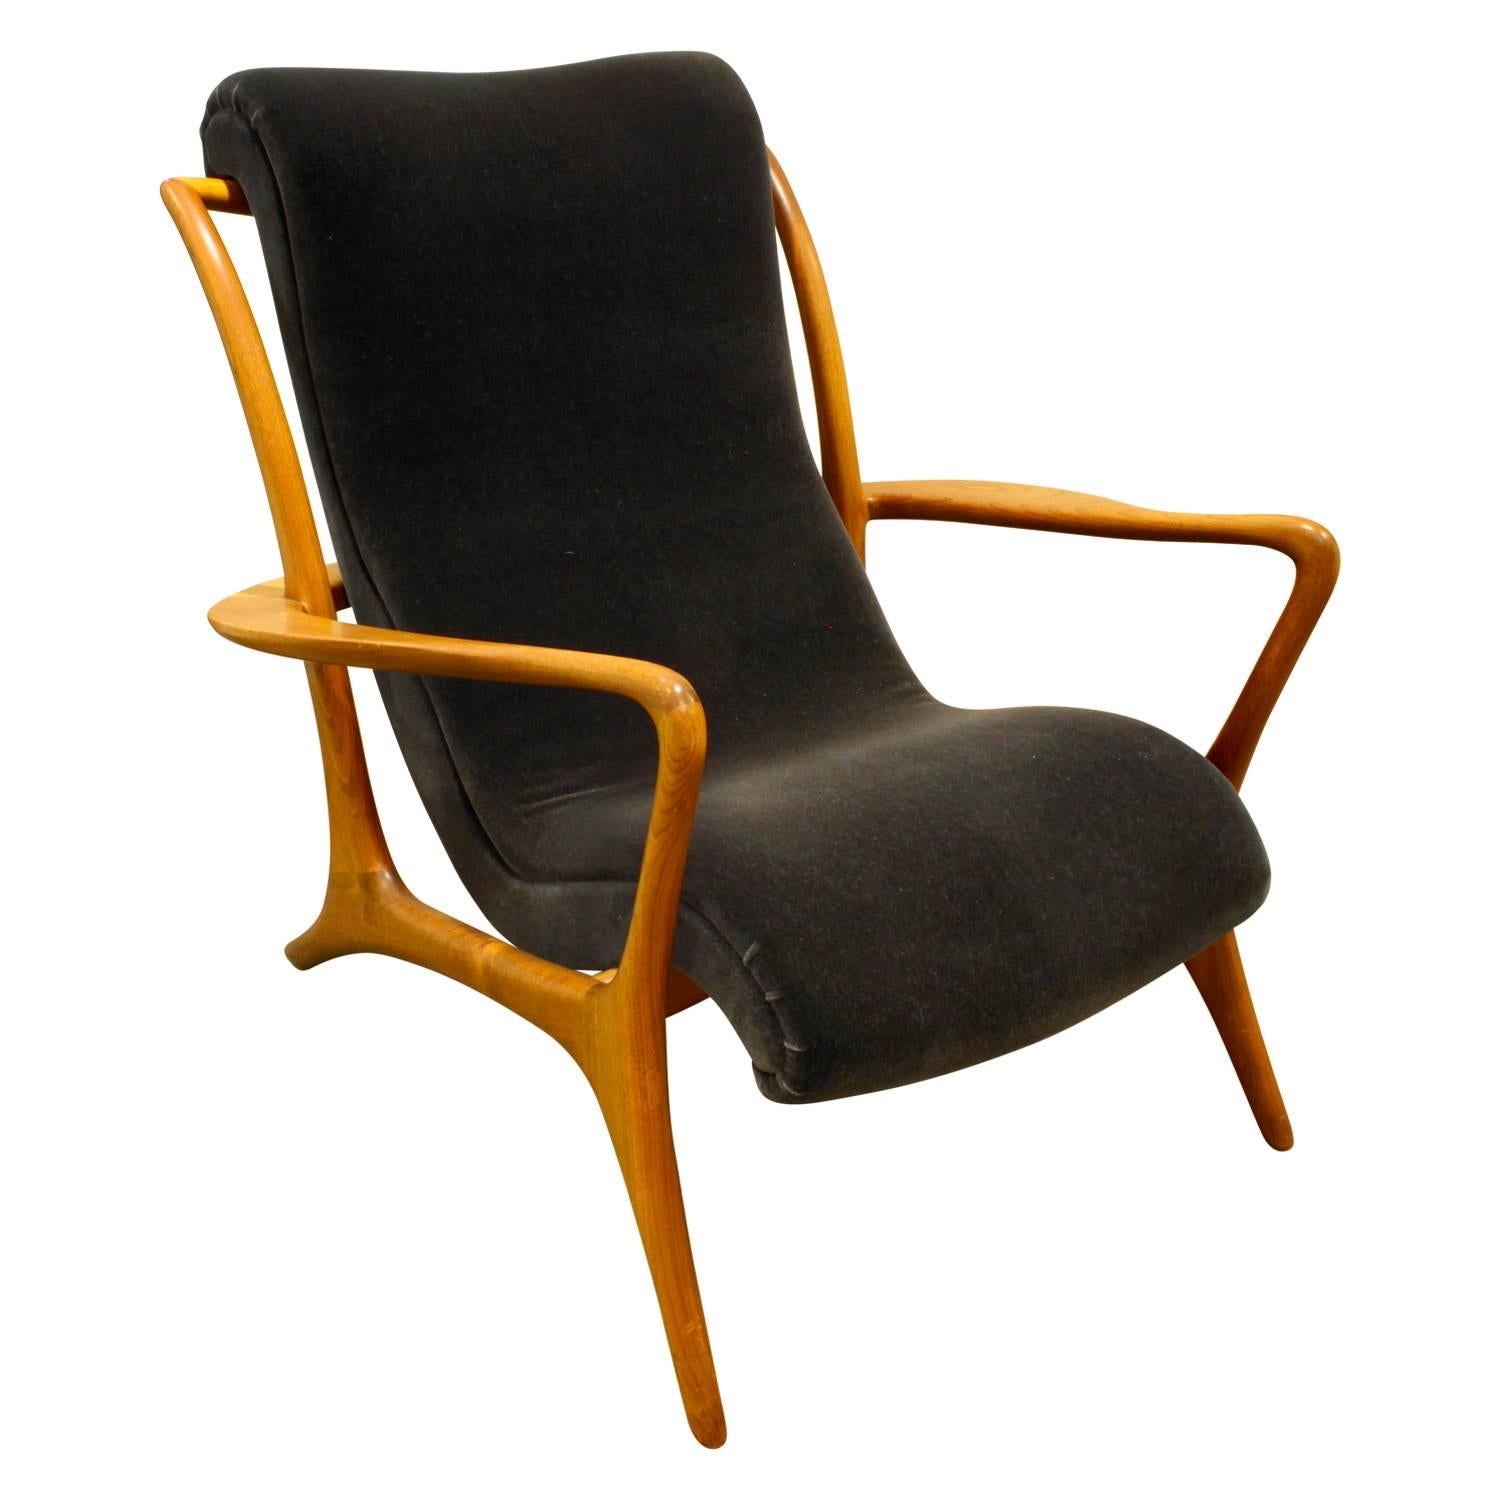 Sculpted walnut Contour chair newly upholstered in dark blue velvet by Vladimir Kagan, American, 1950s. This is an iconic Kagan design with meticulous craftsmanship.